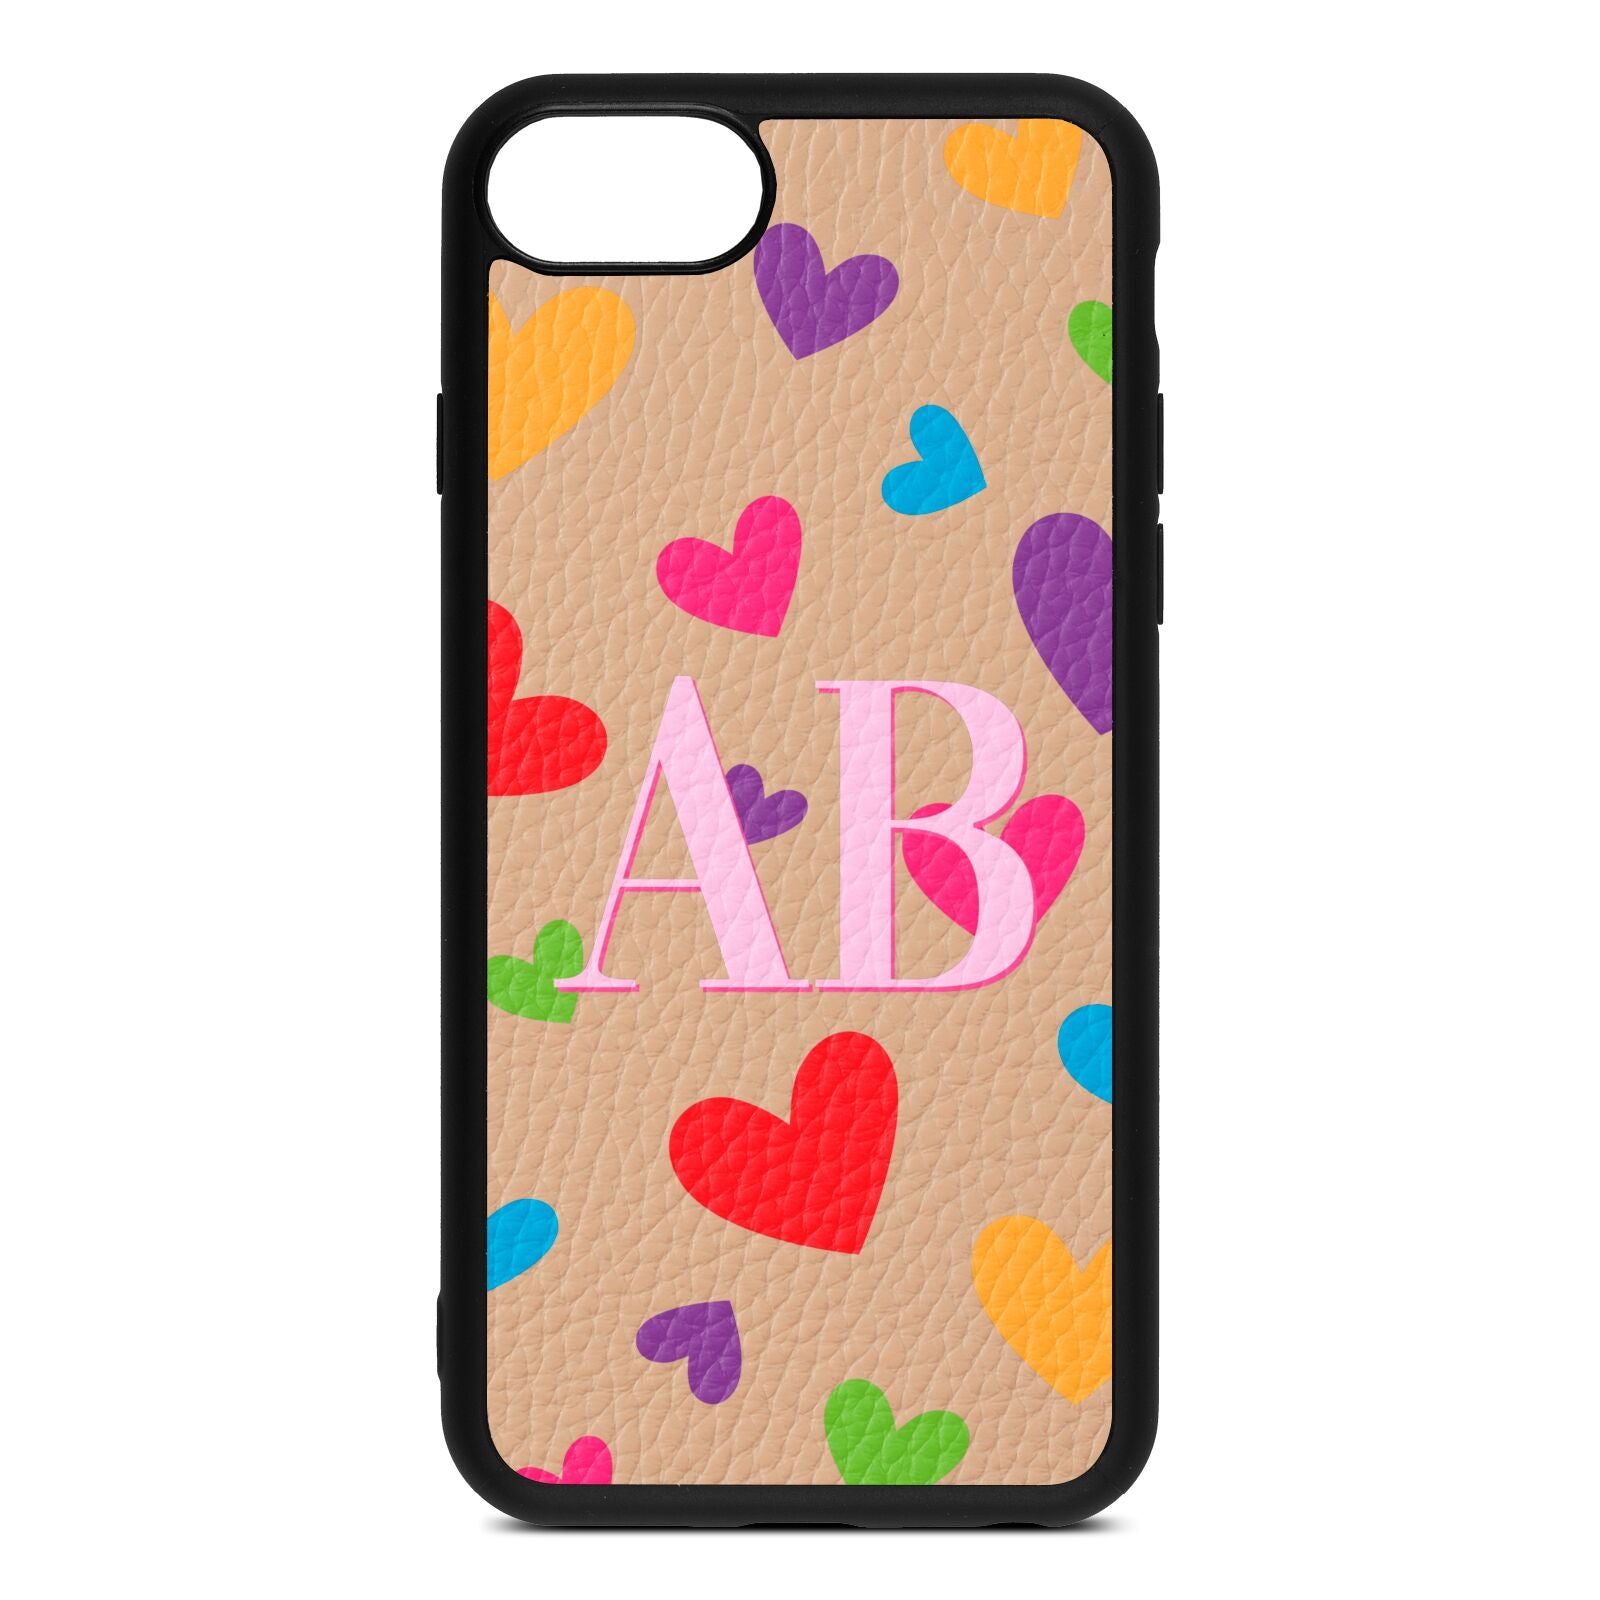 Contrast Initials Heart Print Nude Pebble Leather iPhone 8 Case